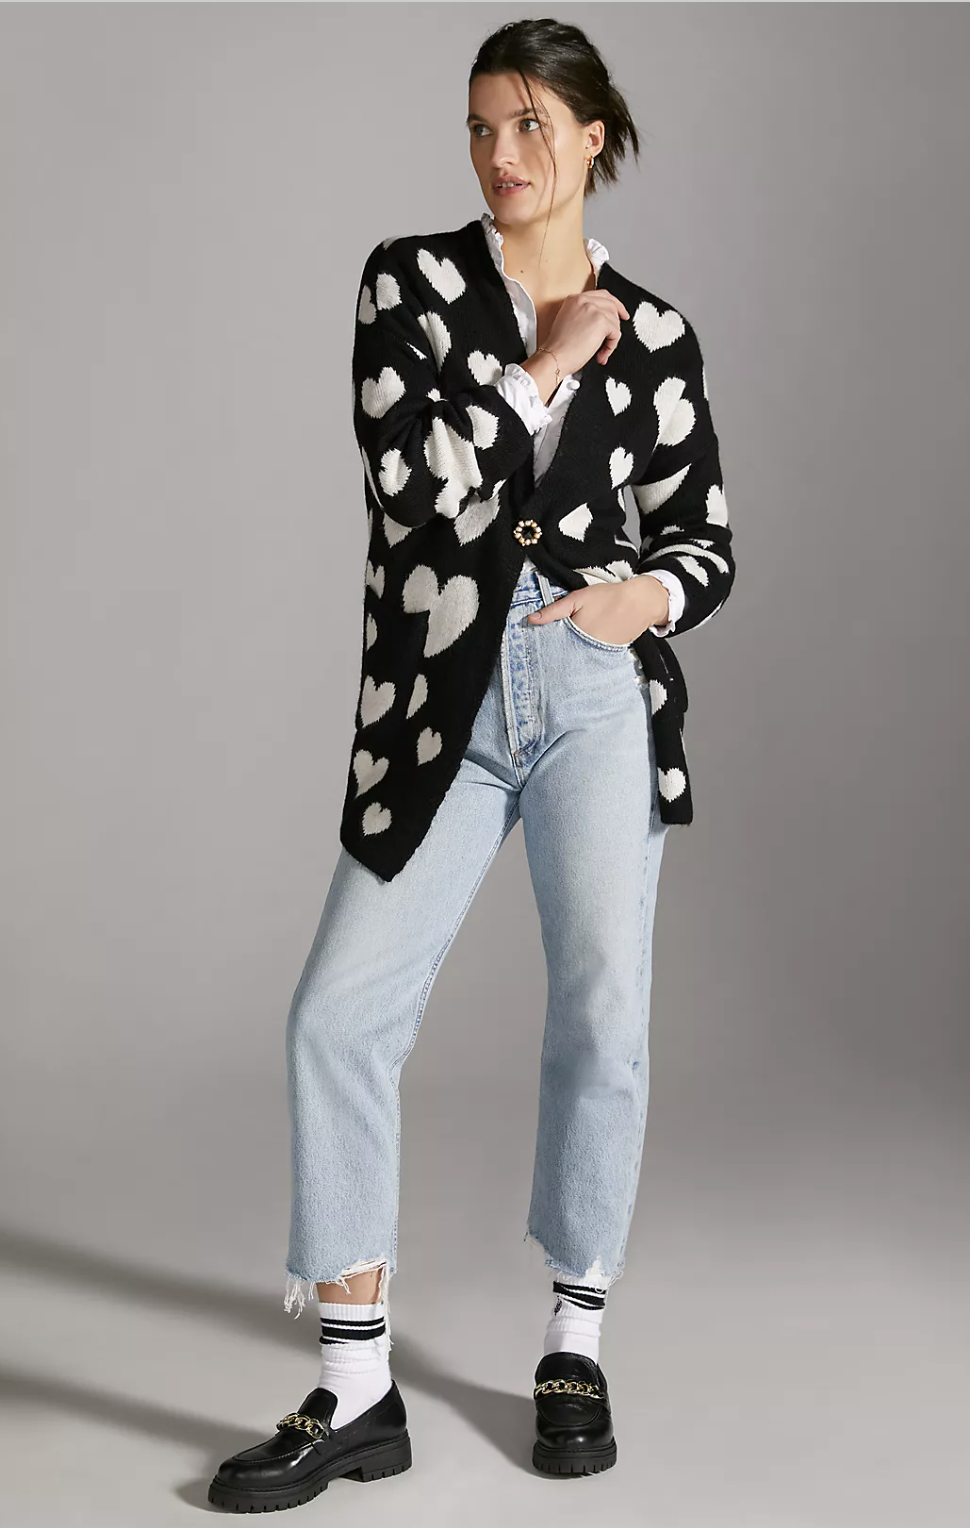 model wearing black and white heart patterned cardigan